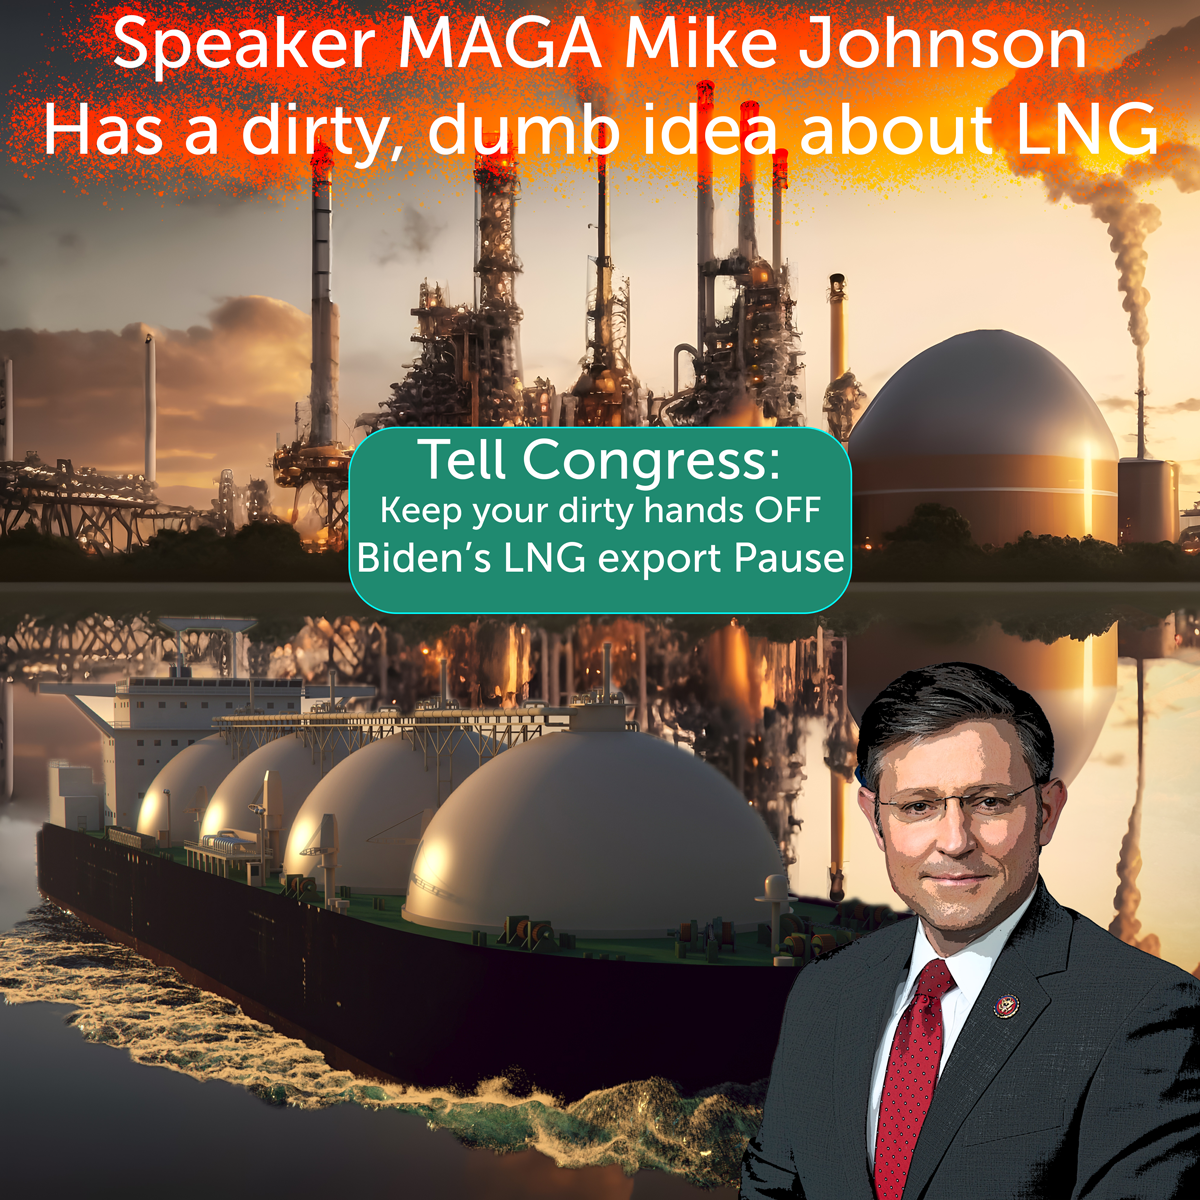 Speaker MAGA Mike Johnson has a dirty, dumb idea about LNG. Tell Congress to keep their dirty hands off Biden's LNG export pause